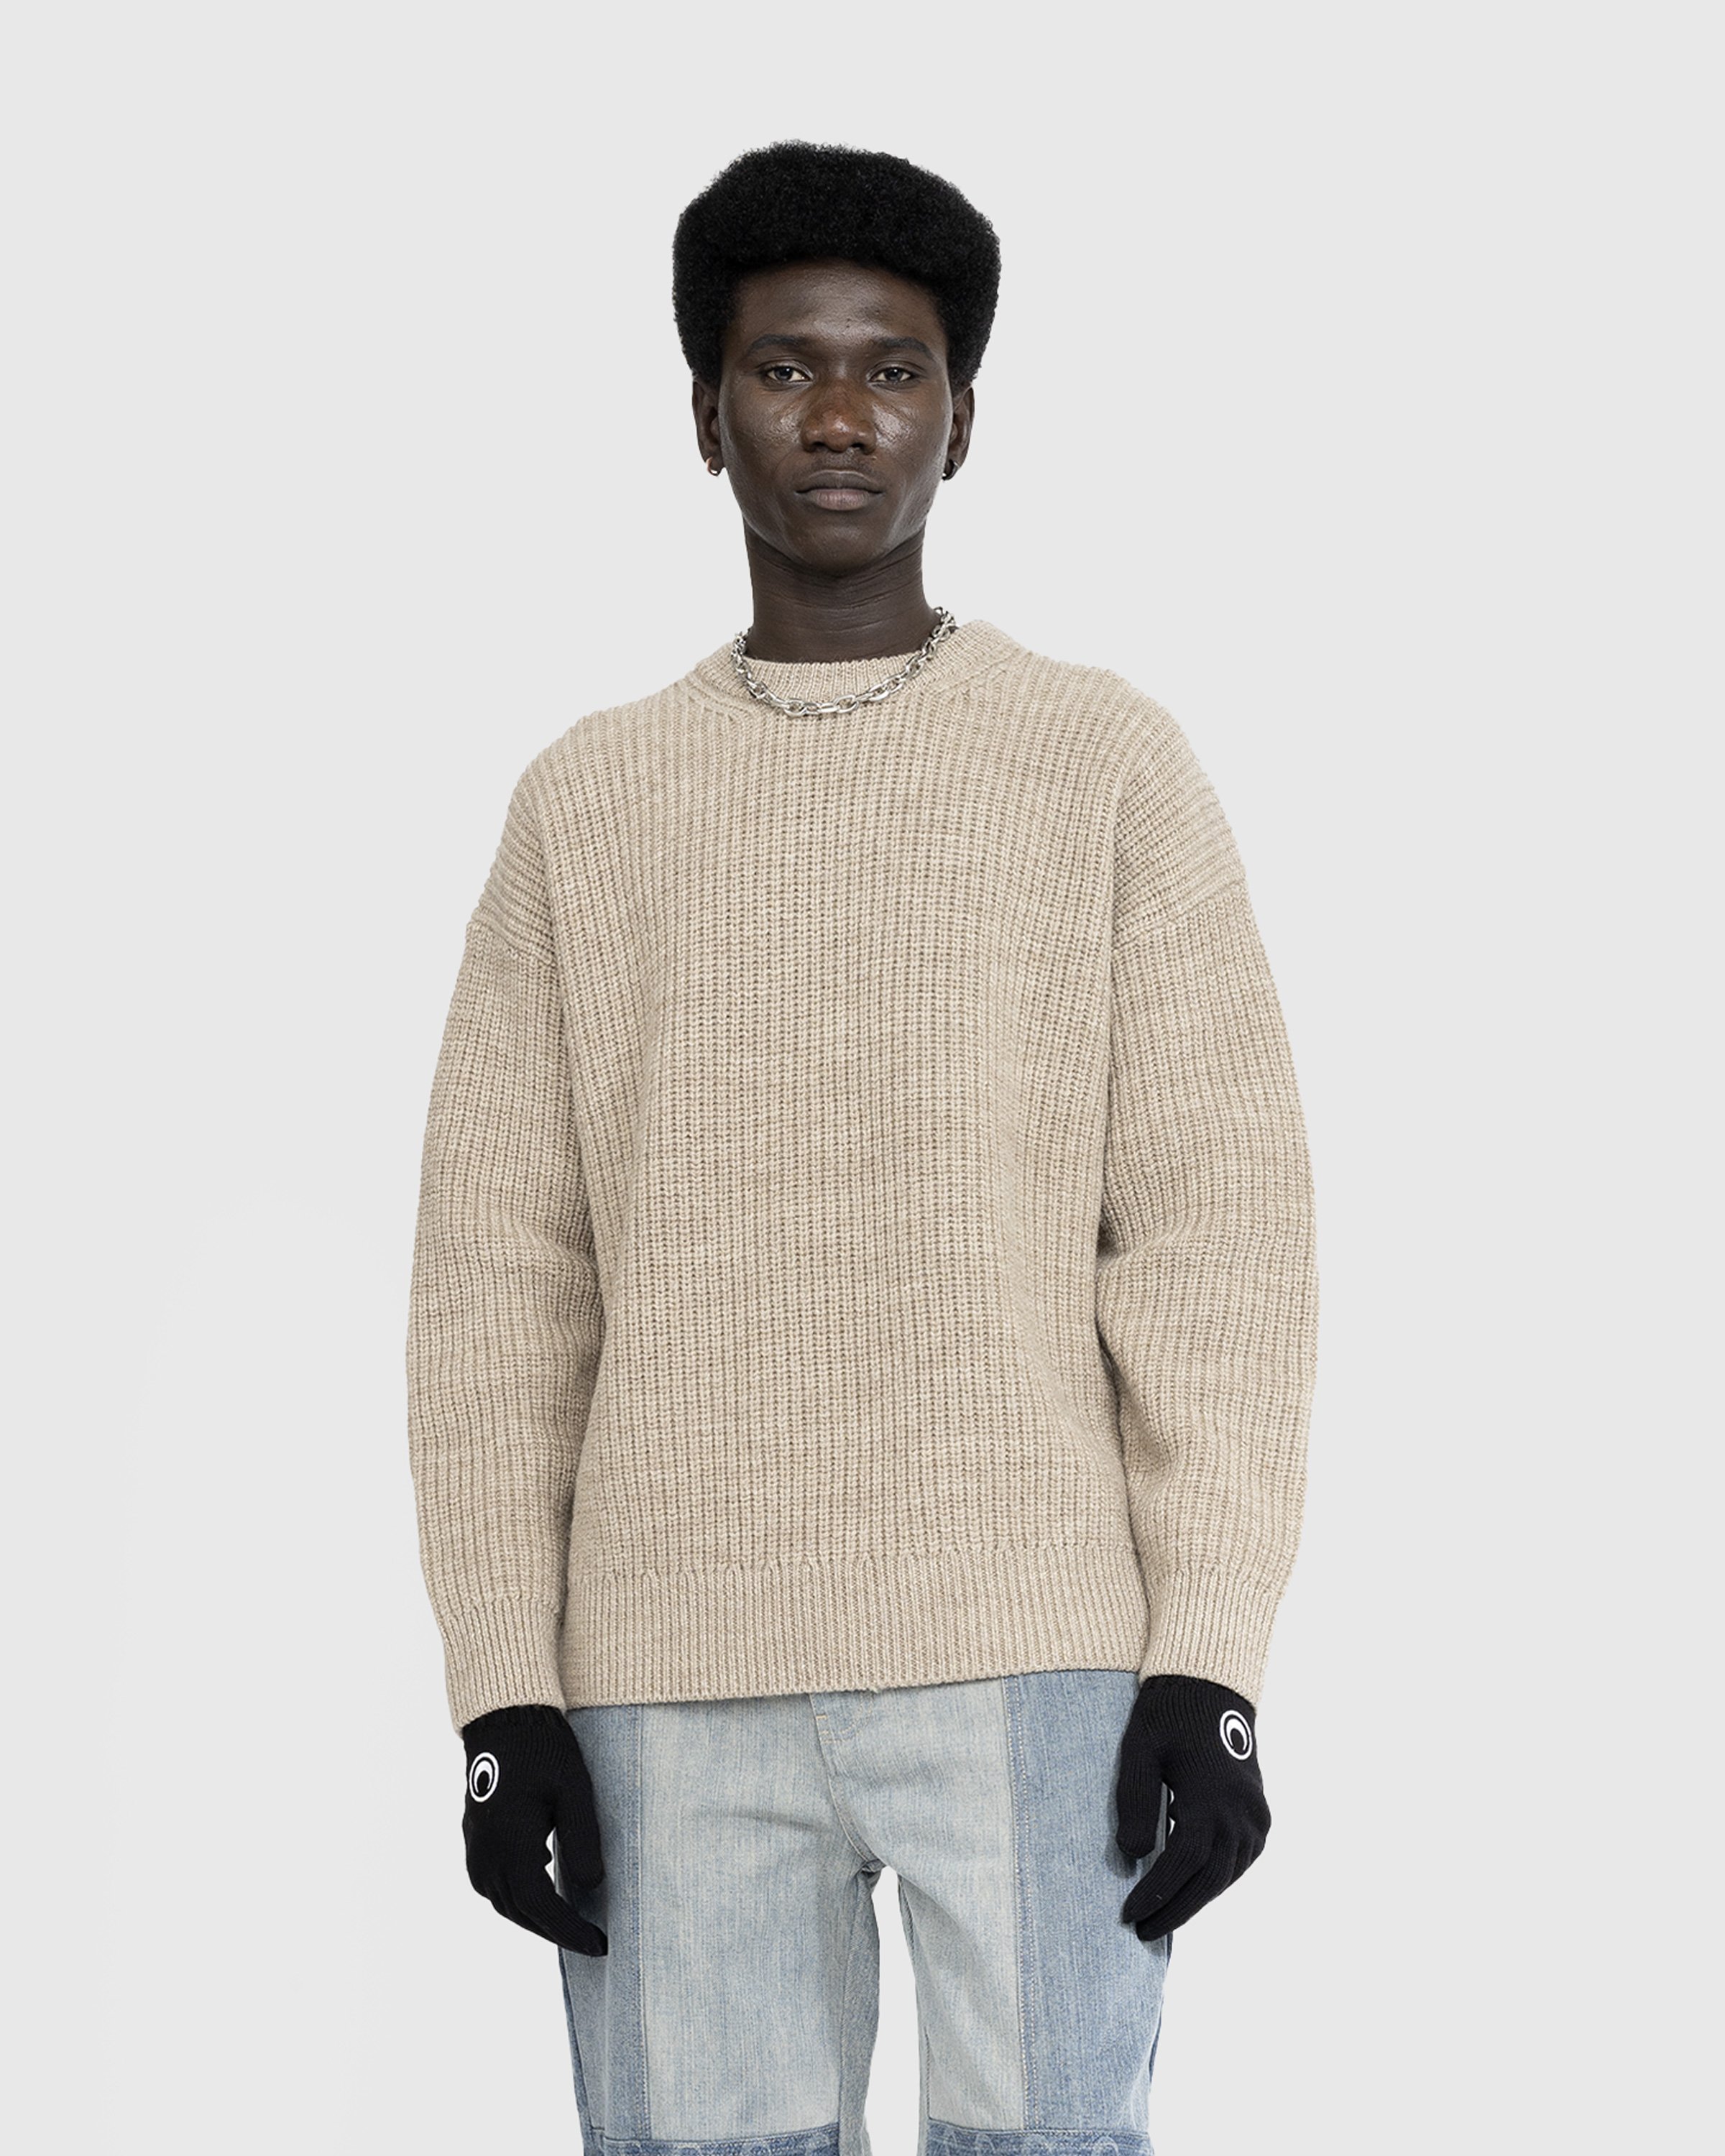 Marine Serre - Wool and Fluffy Knit Crewneck Pullover Beige - Clothing - undefined - Image 2